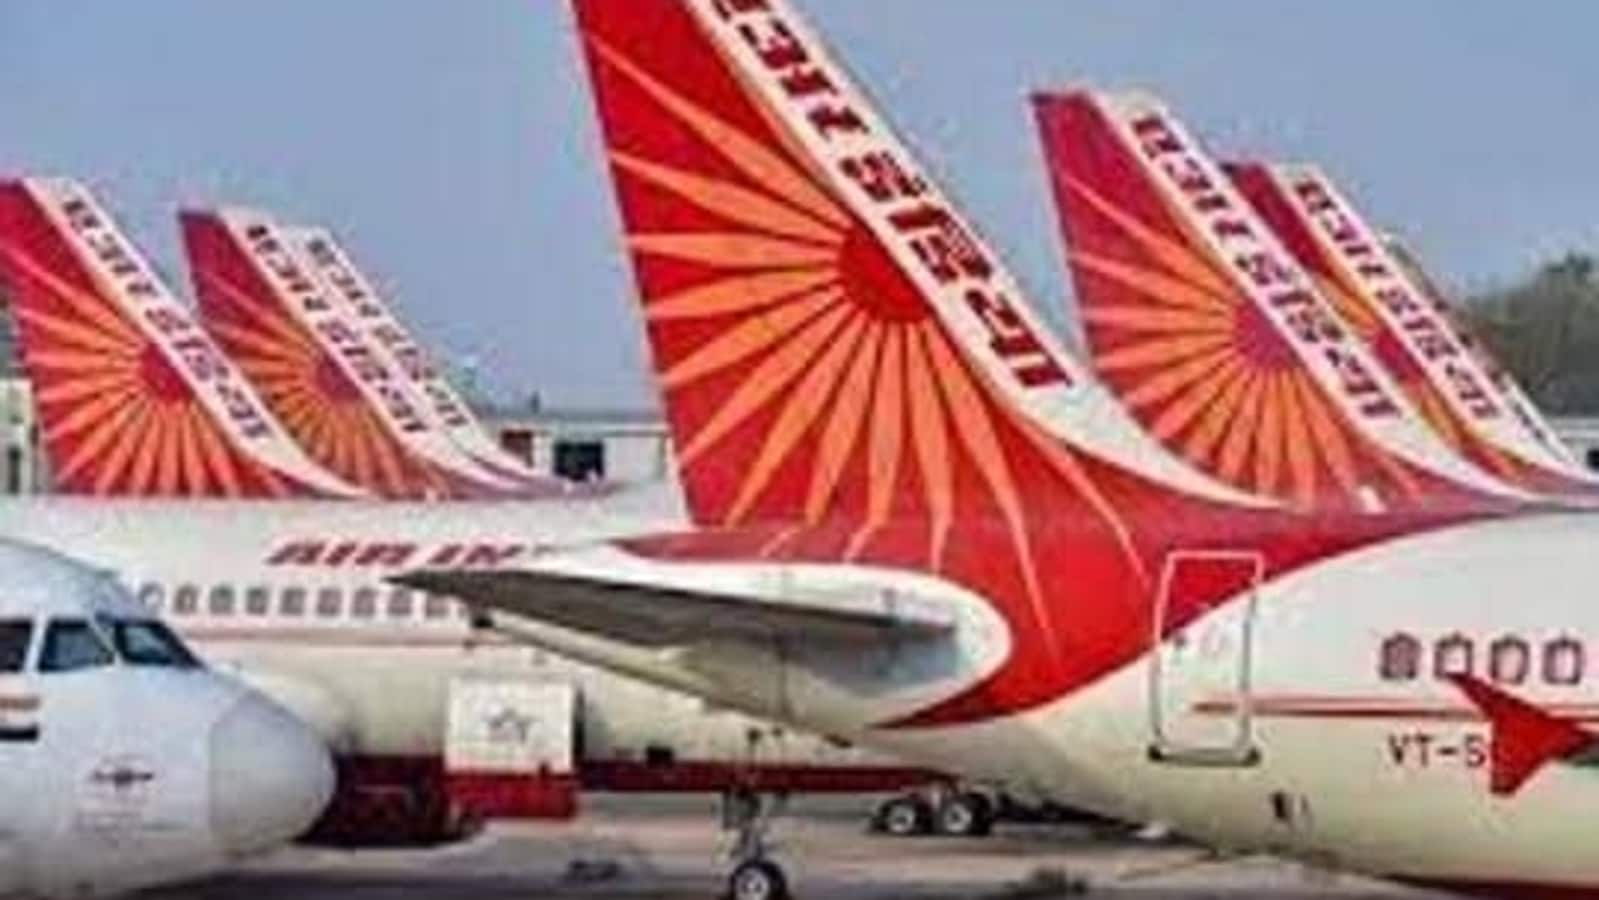 Air India receives over 73,000 applications for pilots, cabin crew: Report